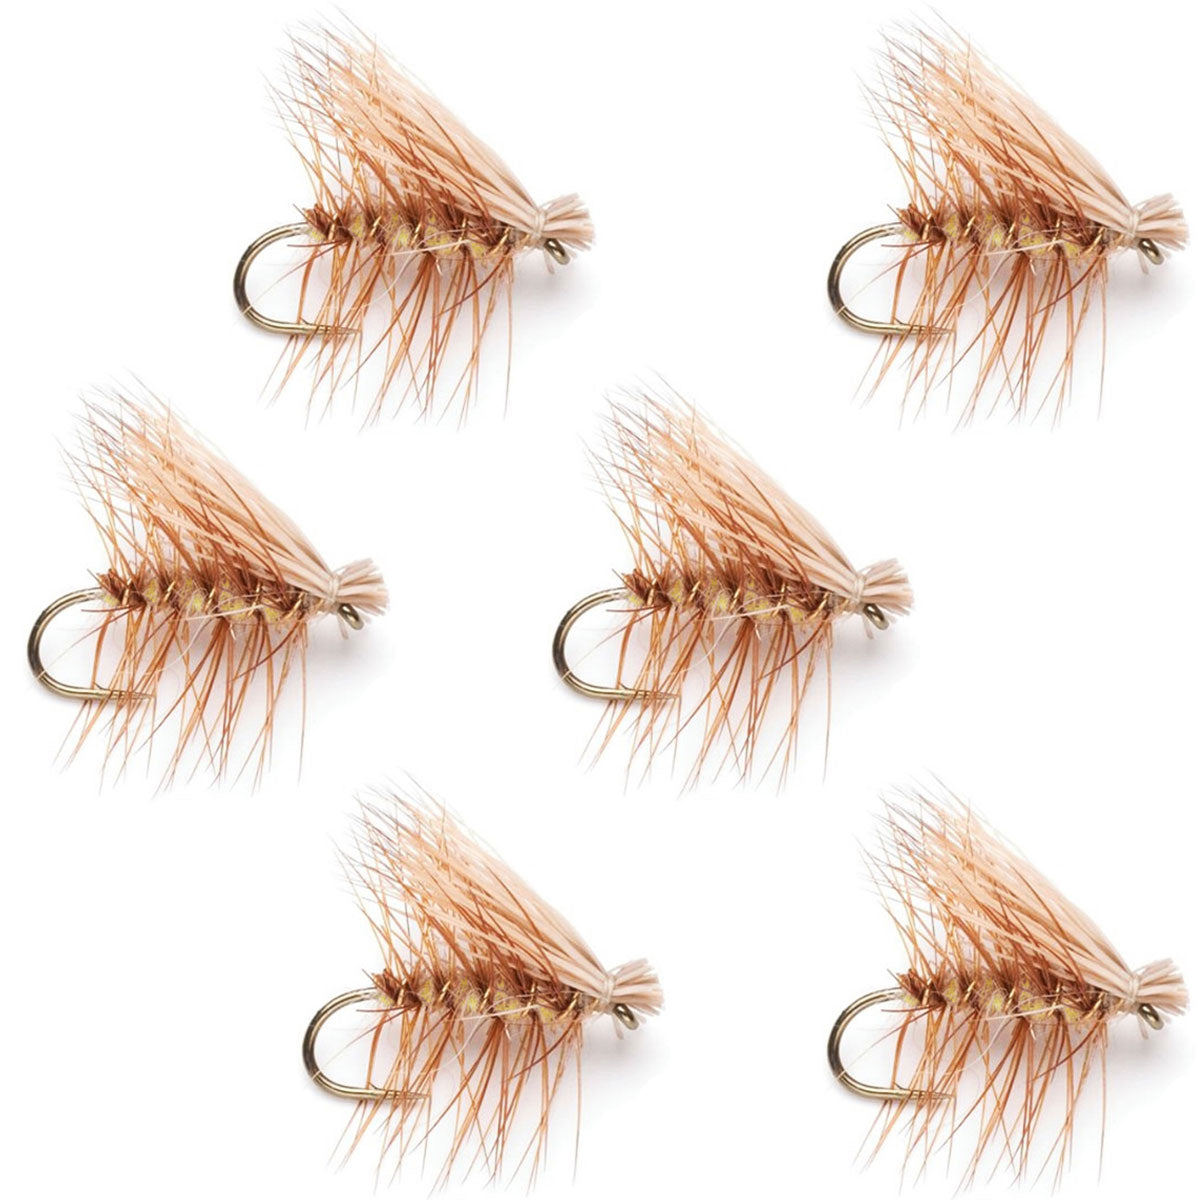 Tan Elk Hair Caddis Classic Trout Dry Fly - Set of 6 Flies Size 14